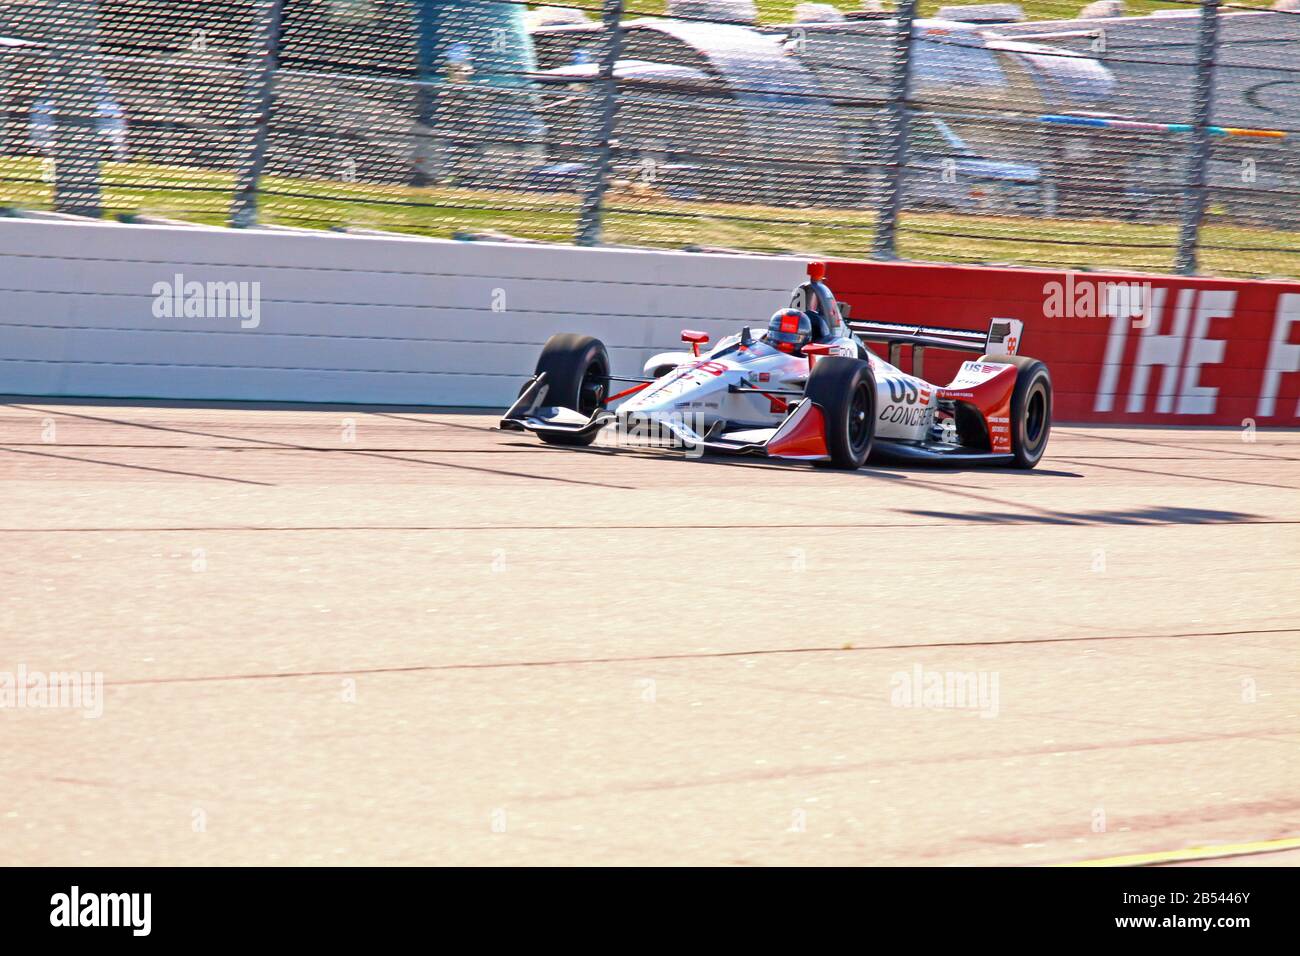 Newton Iowa, July 19, 2019:  98 Marco Andretti, on race track during practice session for the Iowa 300 Indycar race. Stock Photo